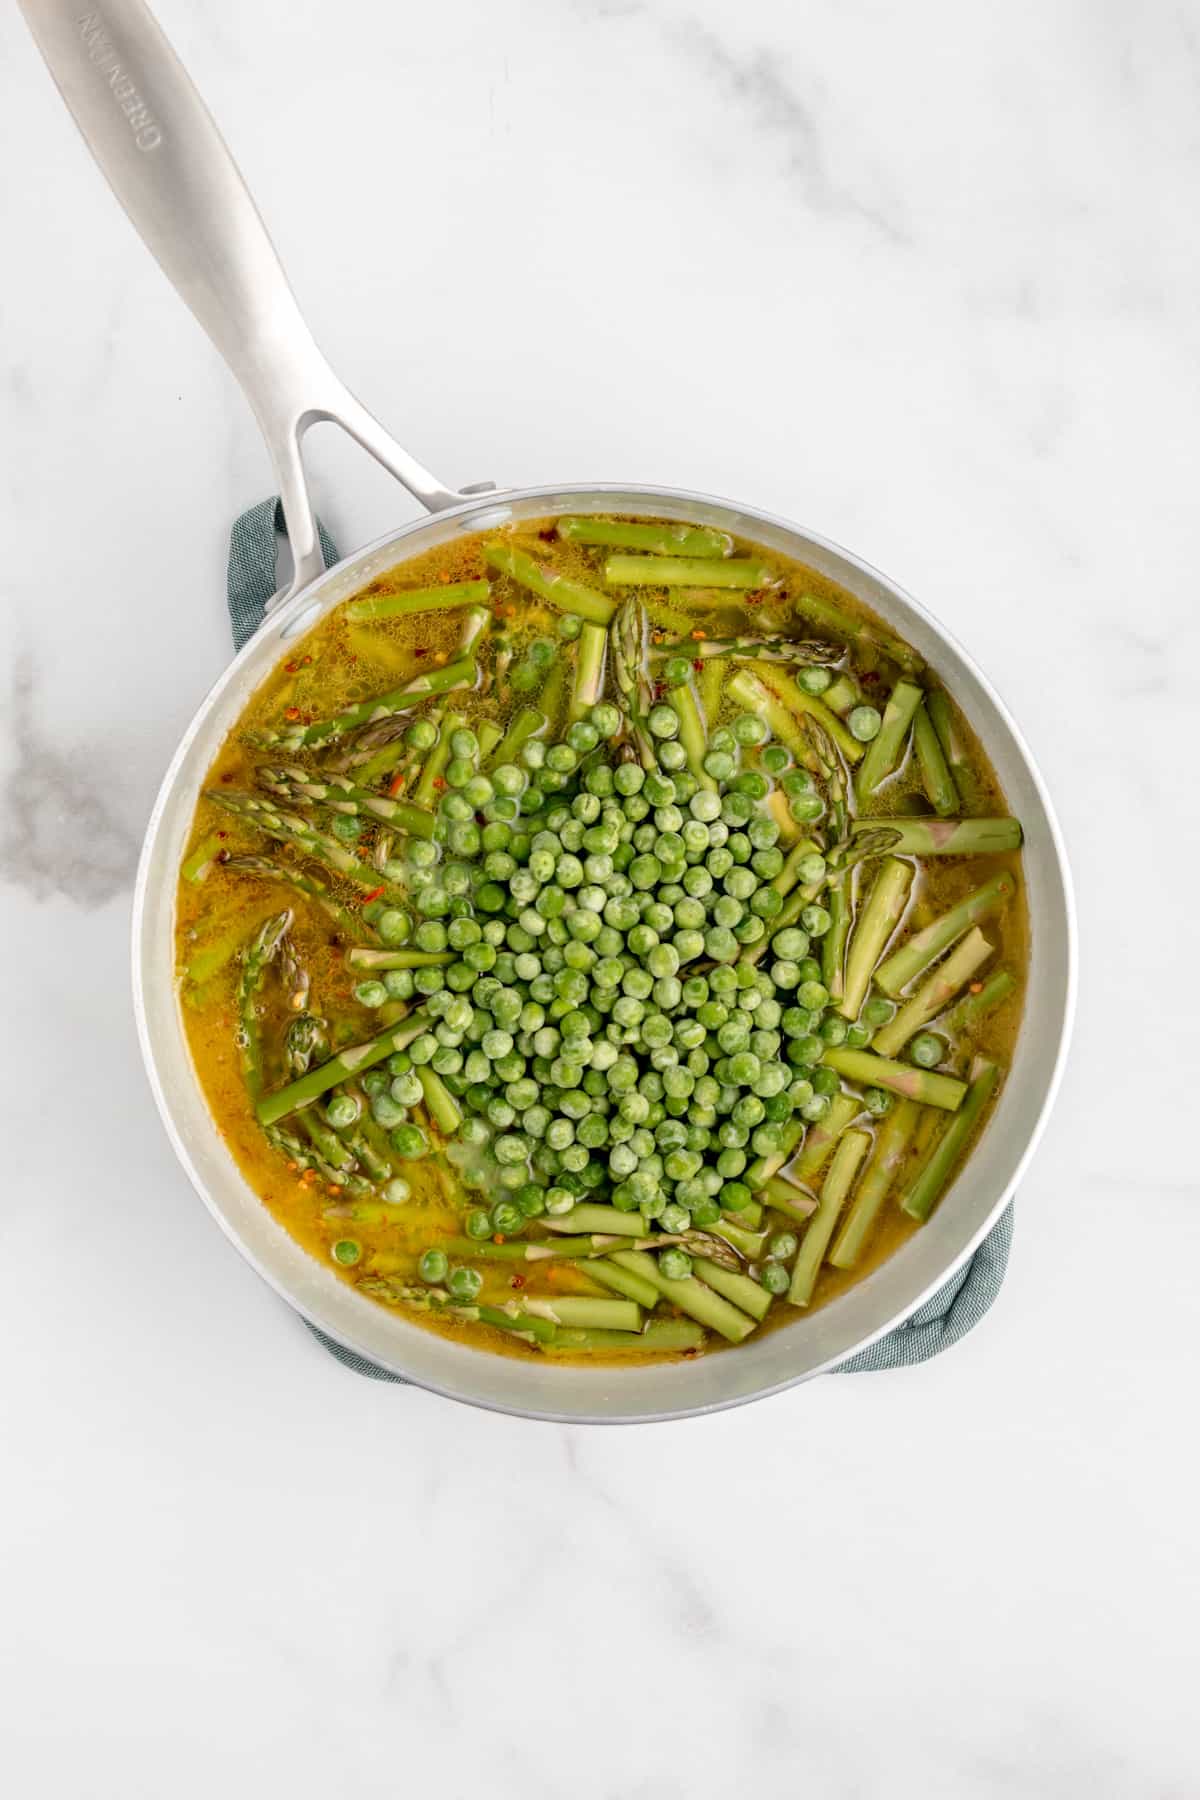 Butter, asparagus, peas and pasta water in a saucepan.